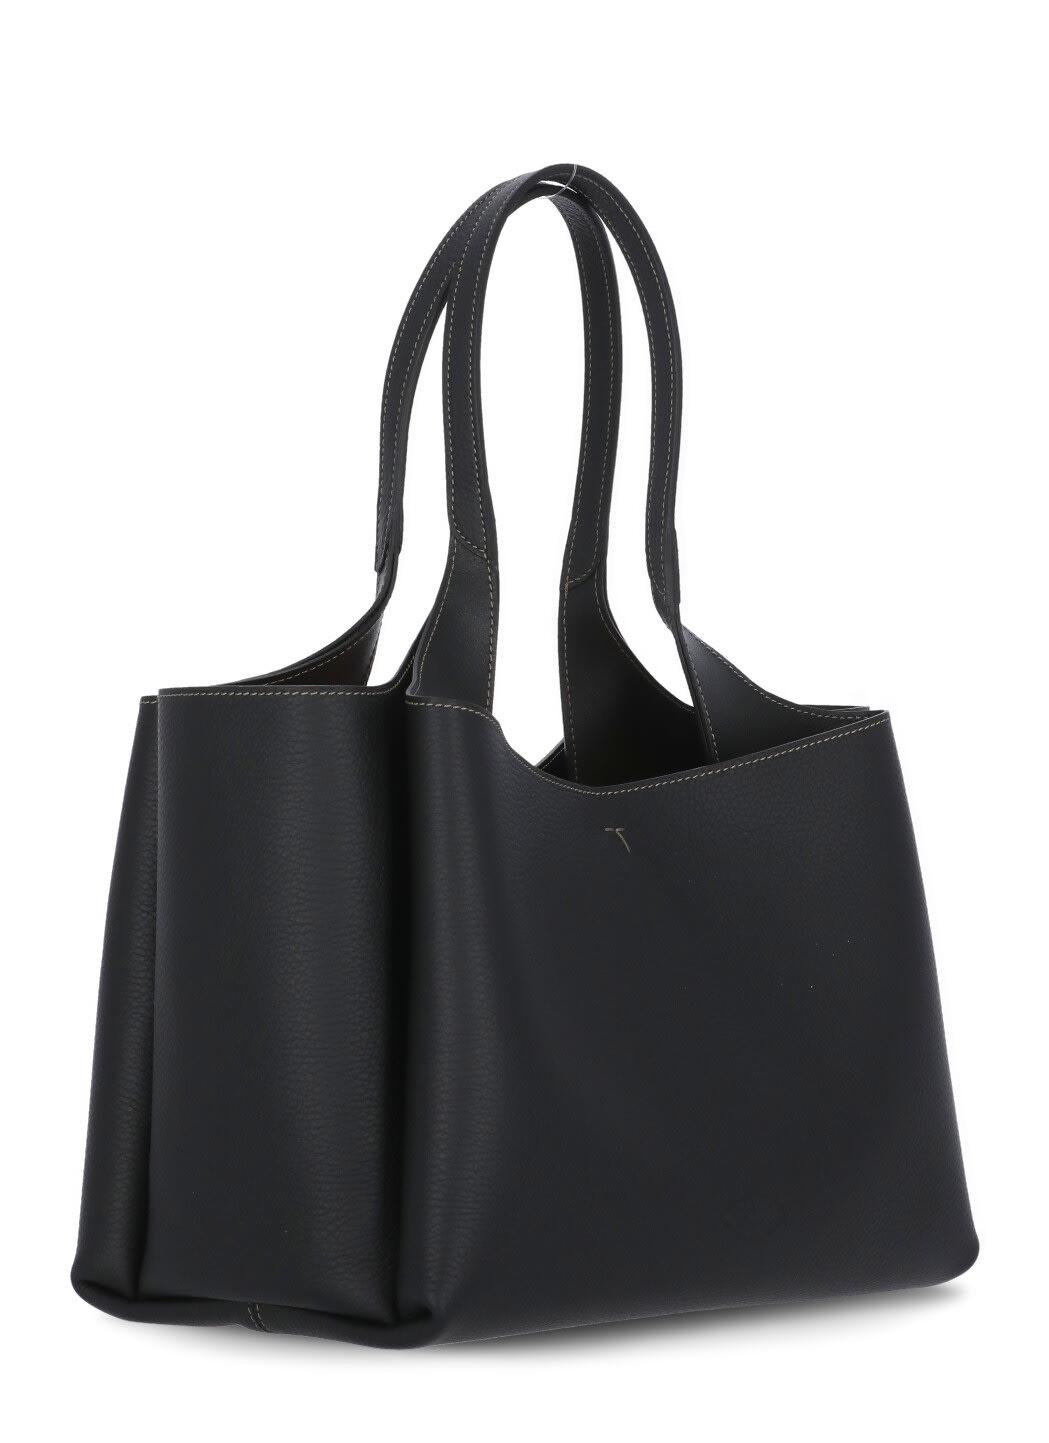 Tod's Pebbled Leather Bag in Black - Lyst